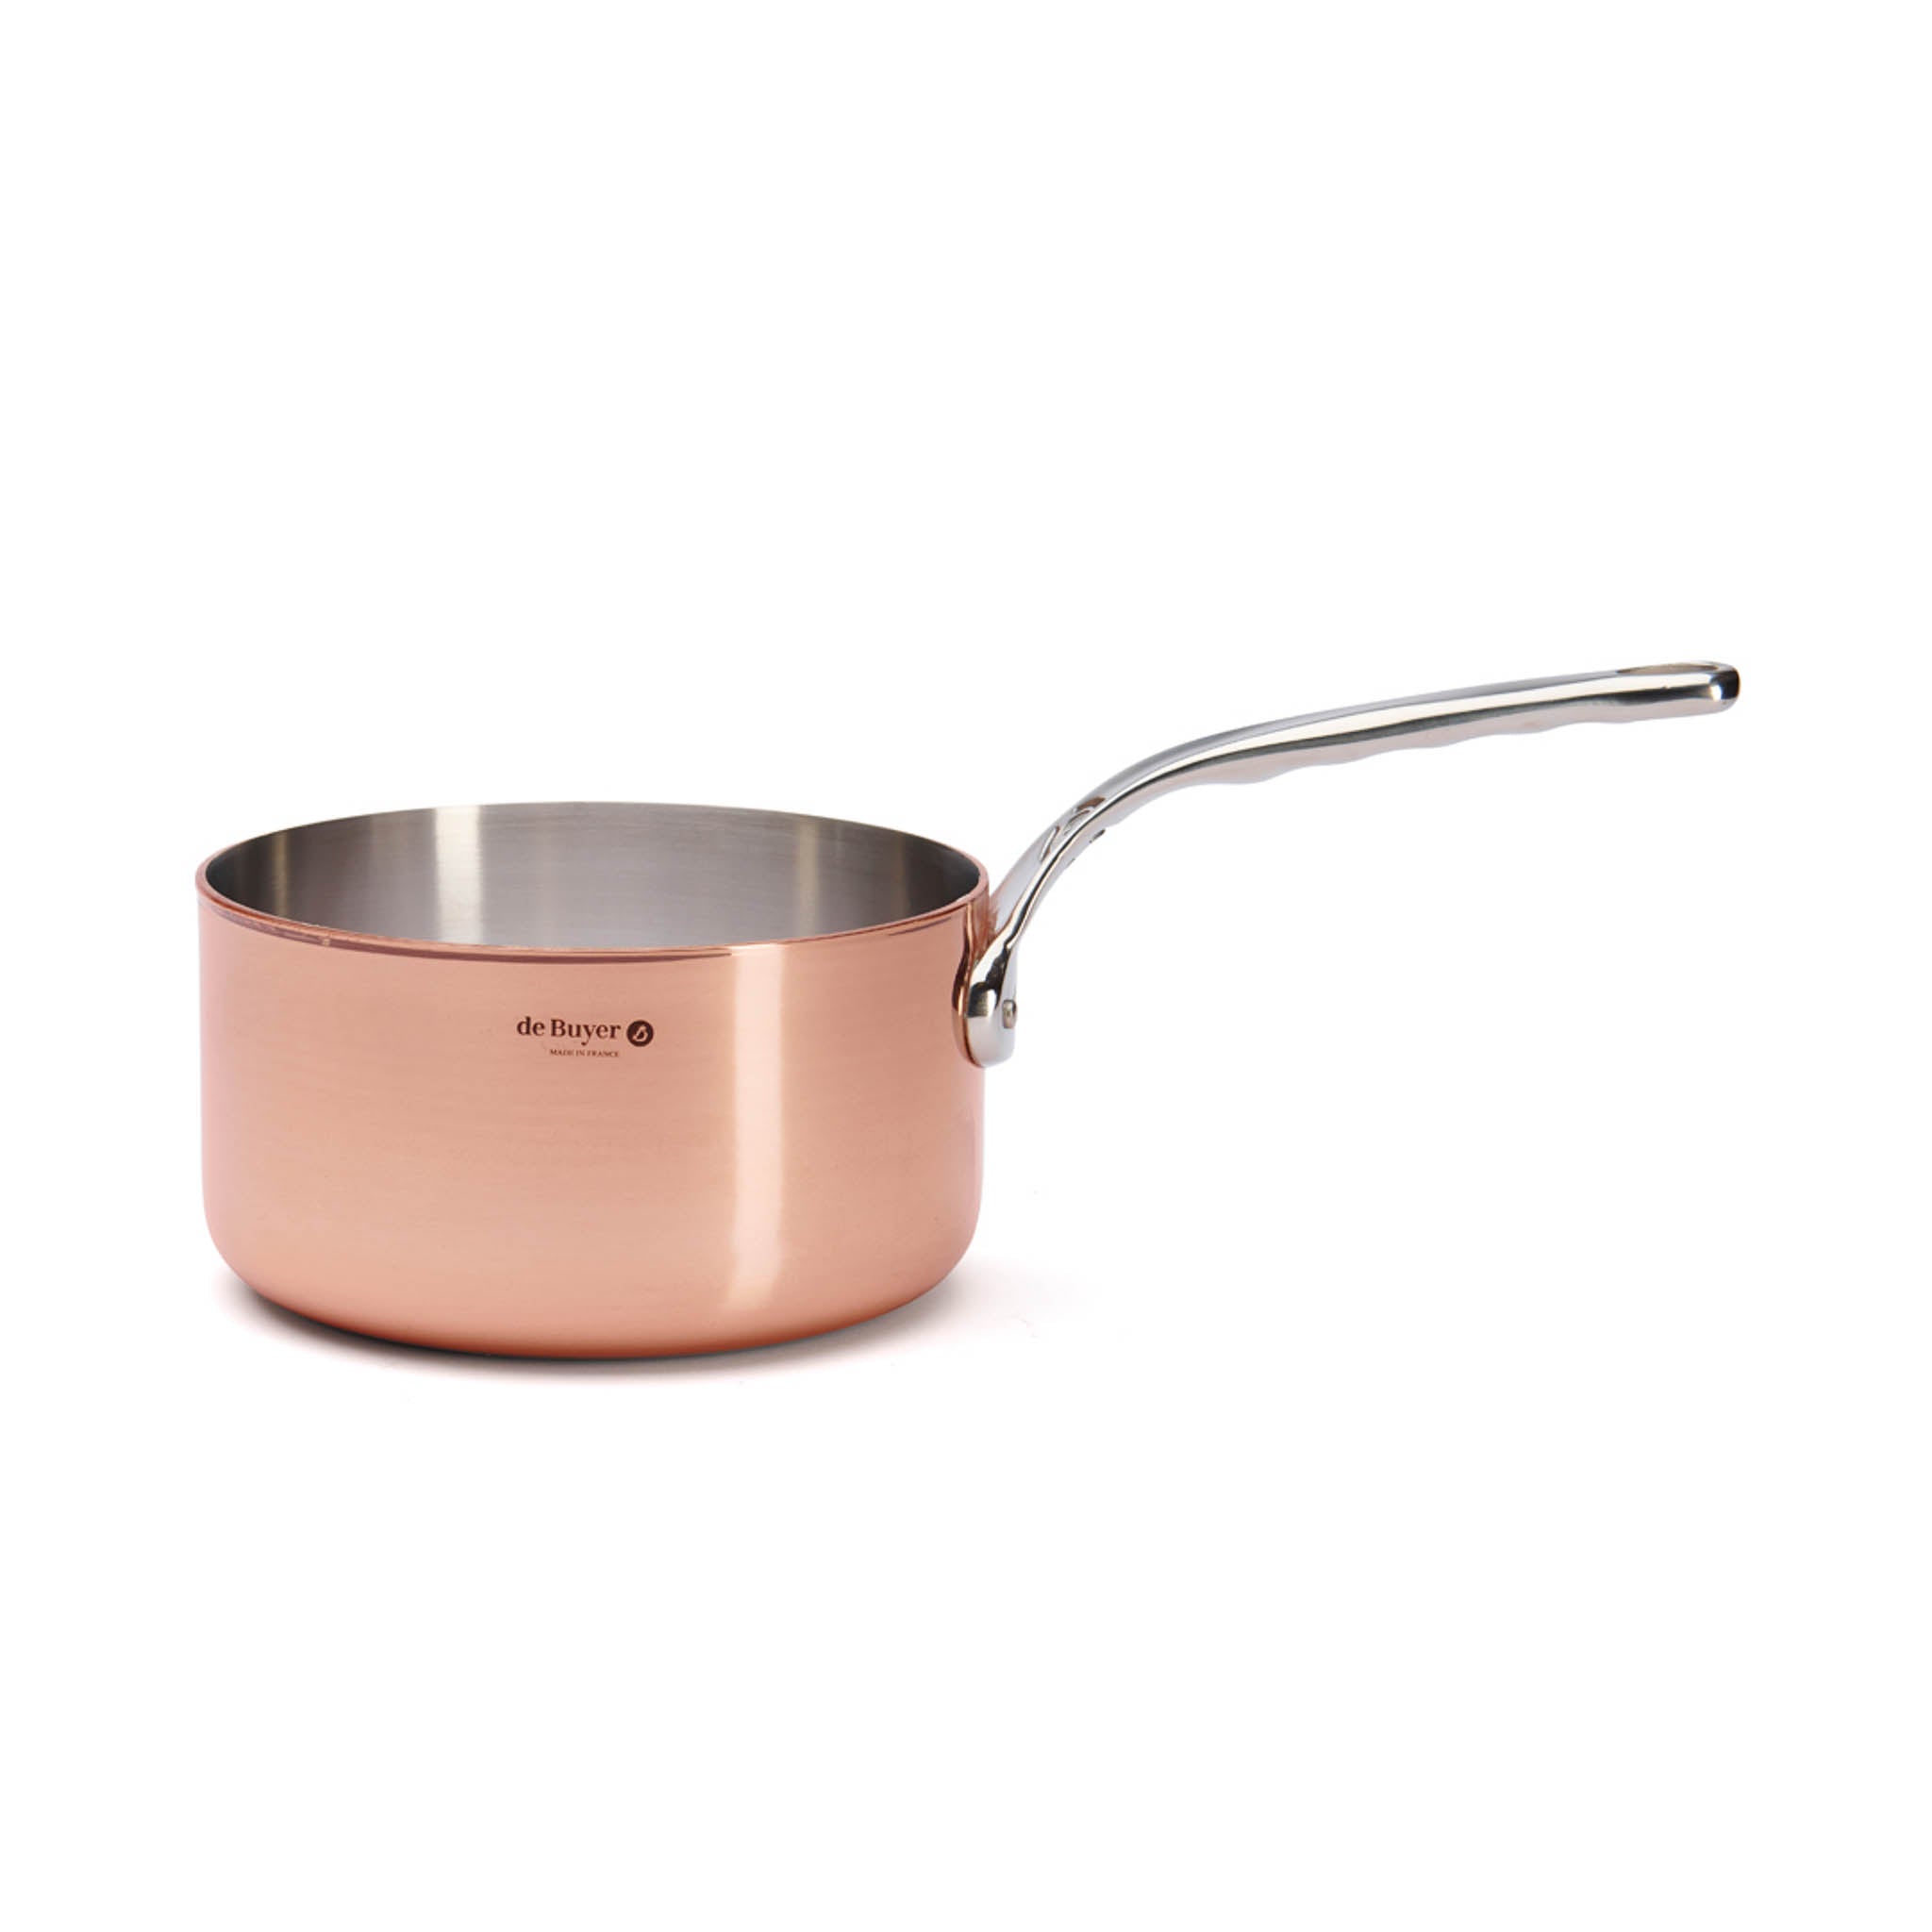 De Buyer Prima Matera Induction Copper Saucepan with Stainless Steel Handle